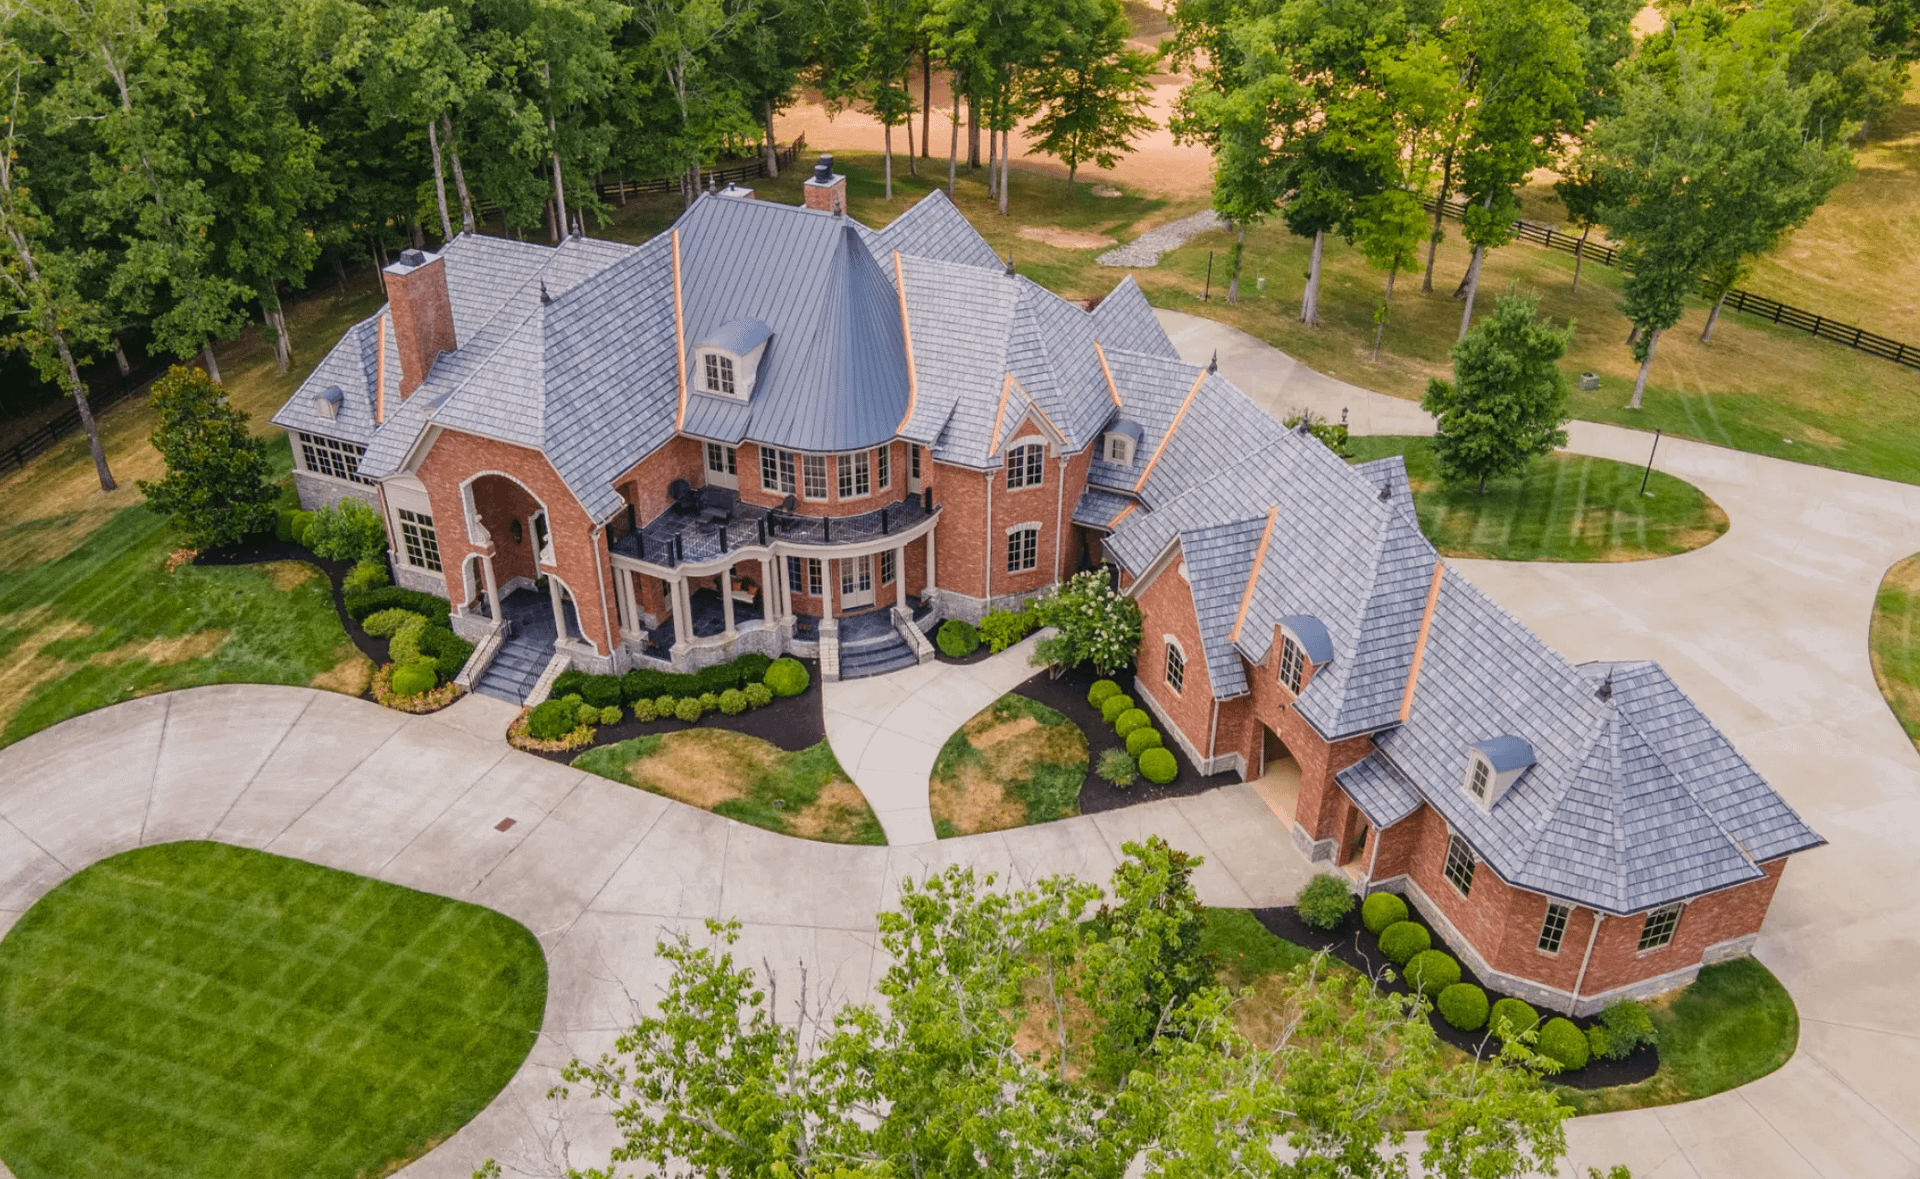 Brick Home On 60 Acres In Tennessee (PHOTOS)